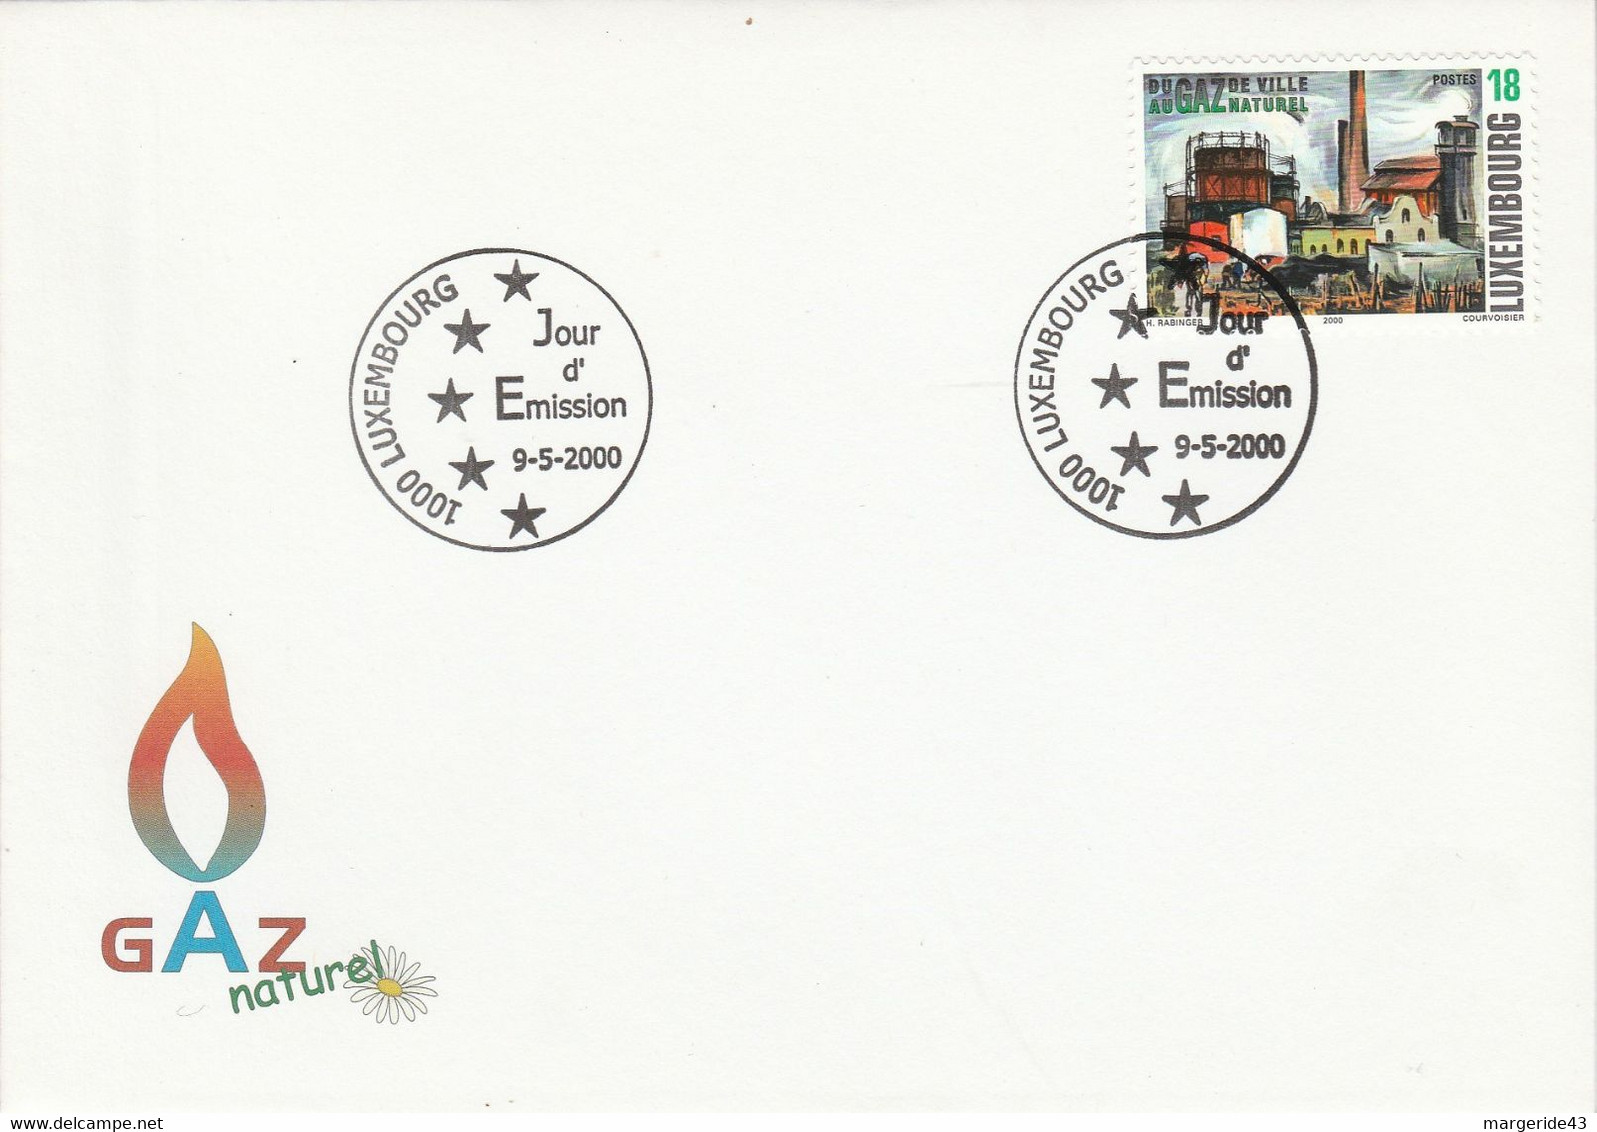 LUXEMBOURG FDC 2000 GAZ NATUREL - FDC